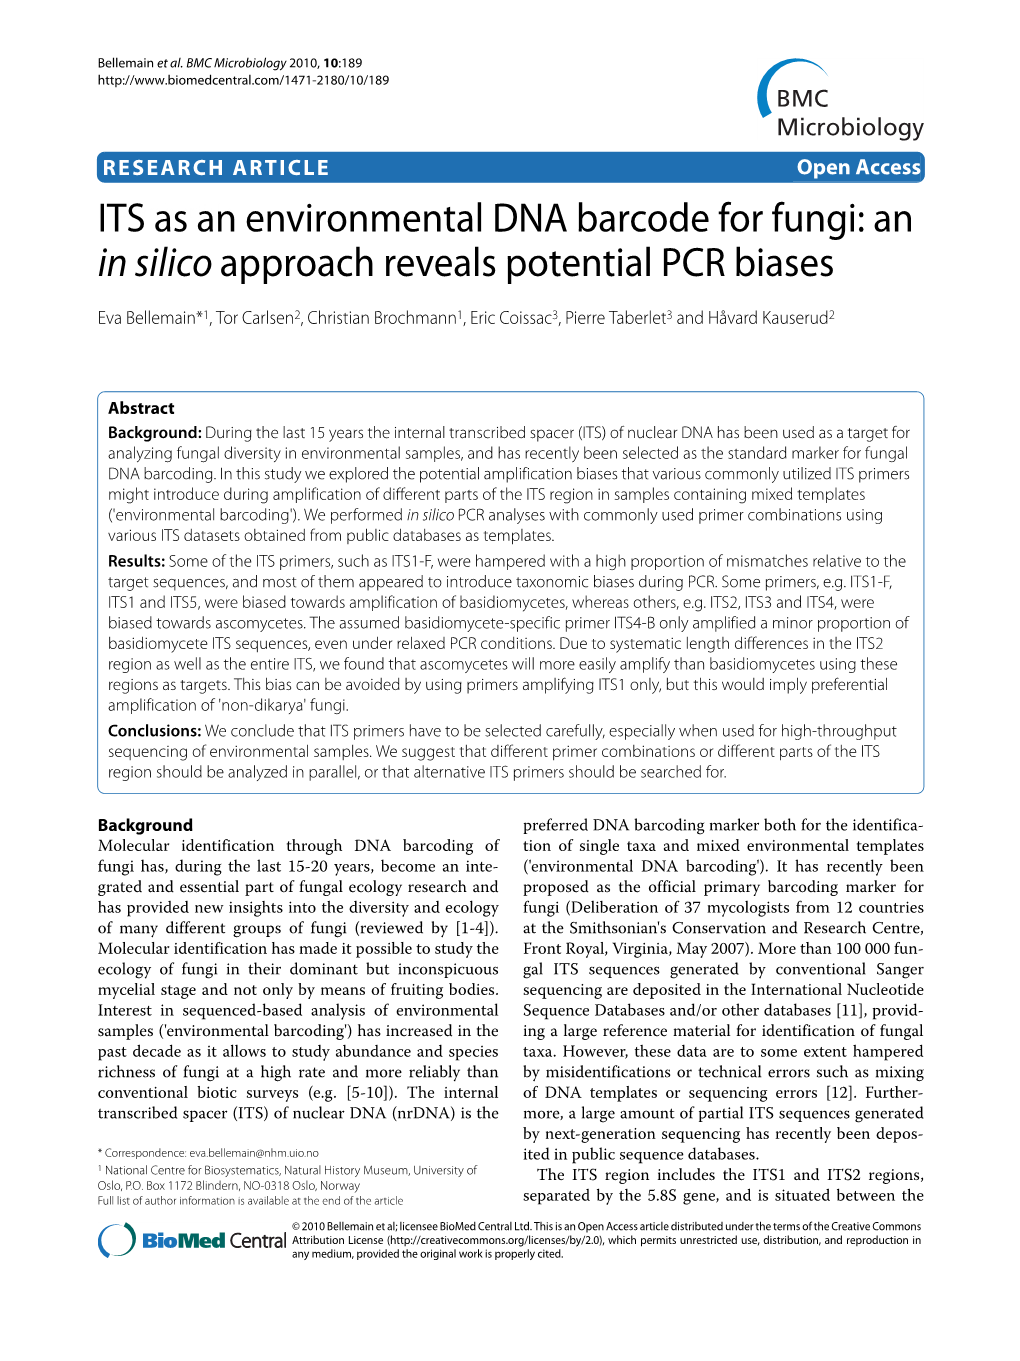 ITS As an Environmental DNA Barcode for Fungi: an in Silico Approach